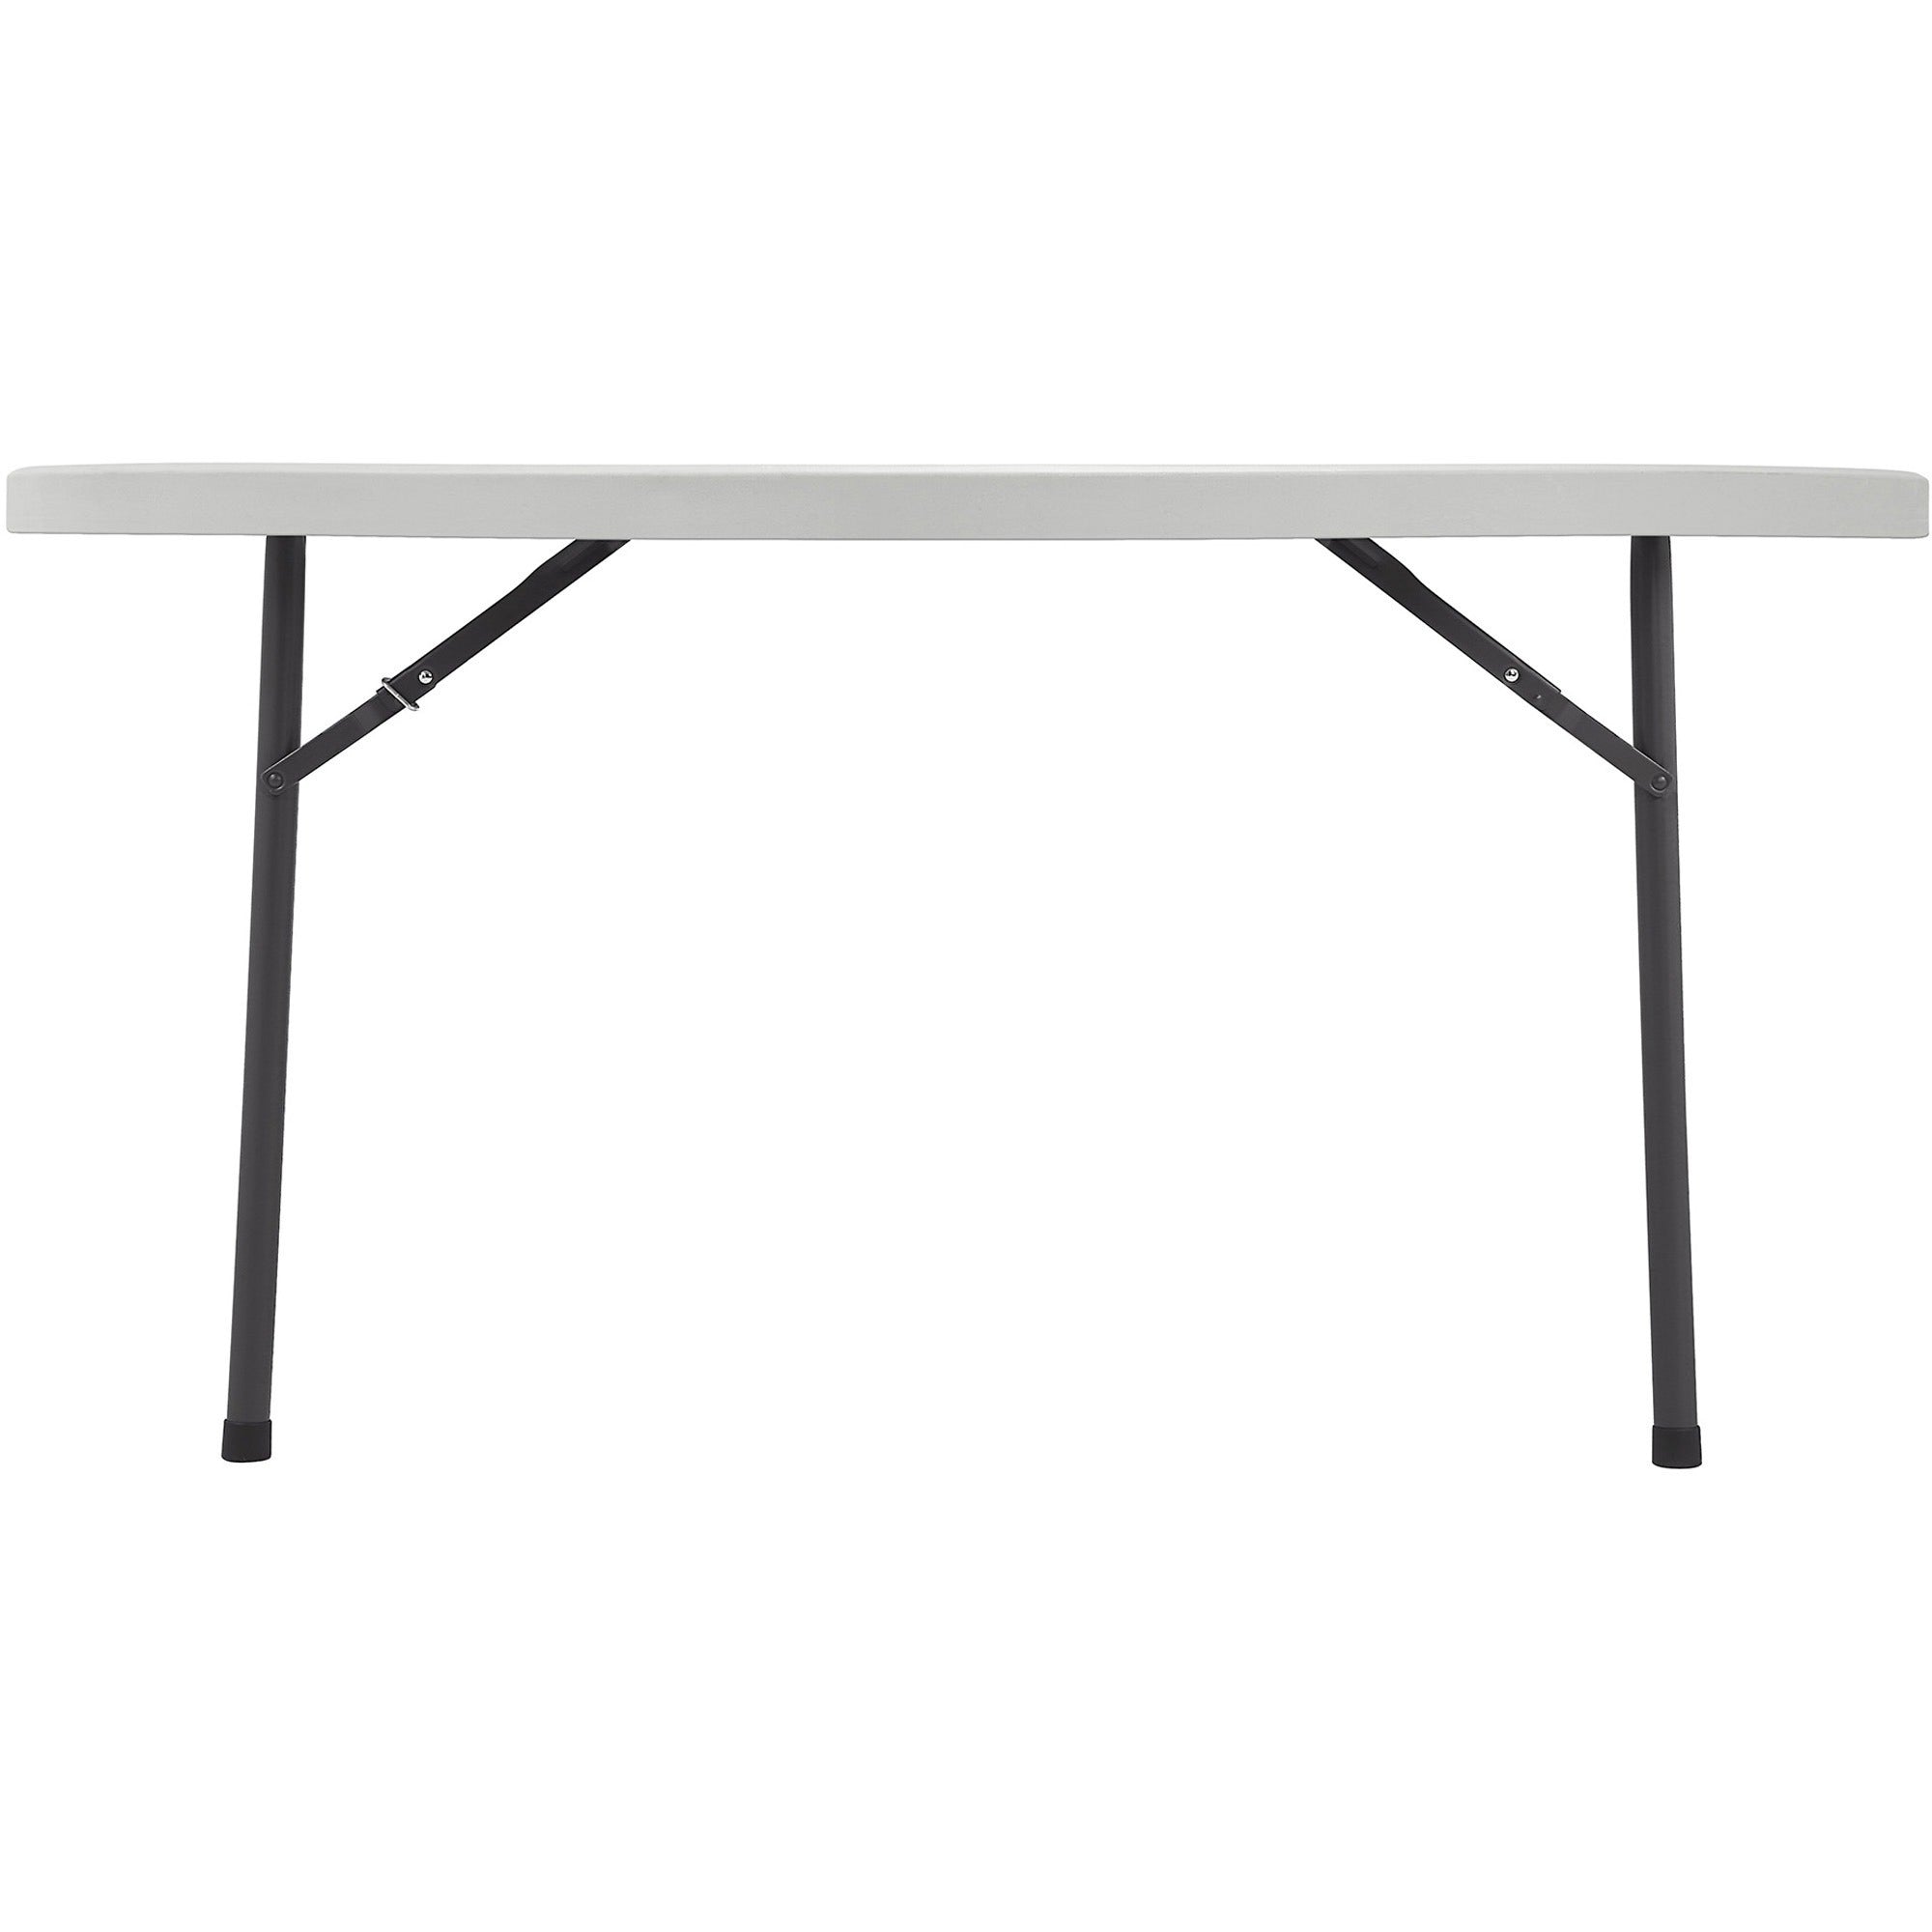 Lorell Ultra-Lite Banquet Folding Table - For - Table TopRound Top - 700 lb Capacity x 60" Table Top Diameter - 29.25" Height - Gray - 1 Each - 